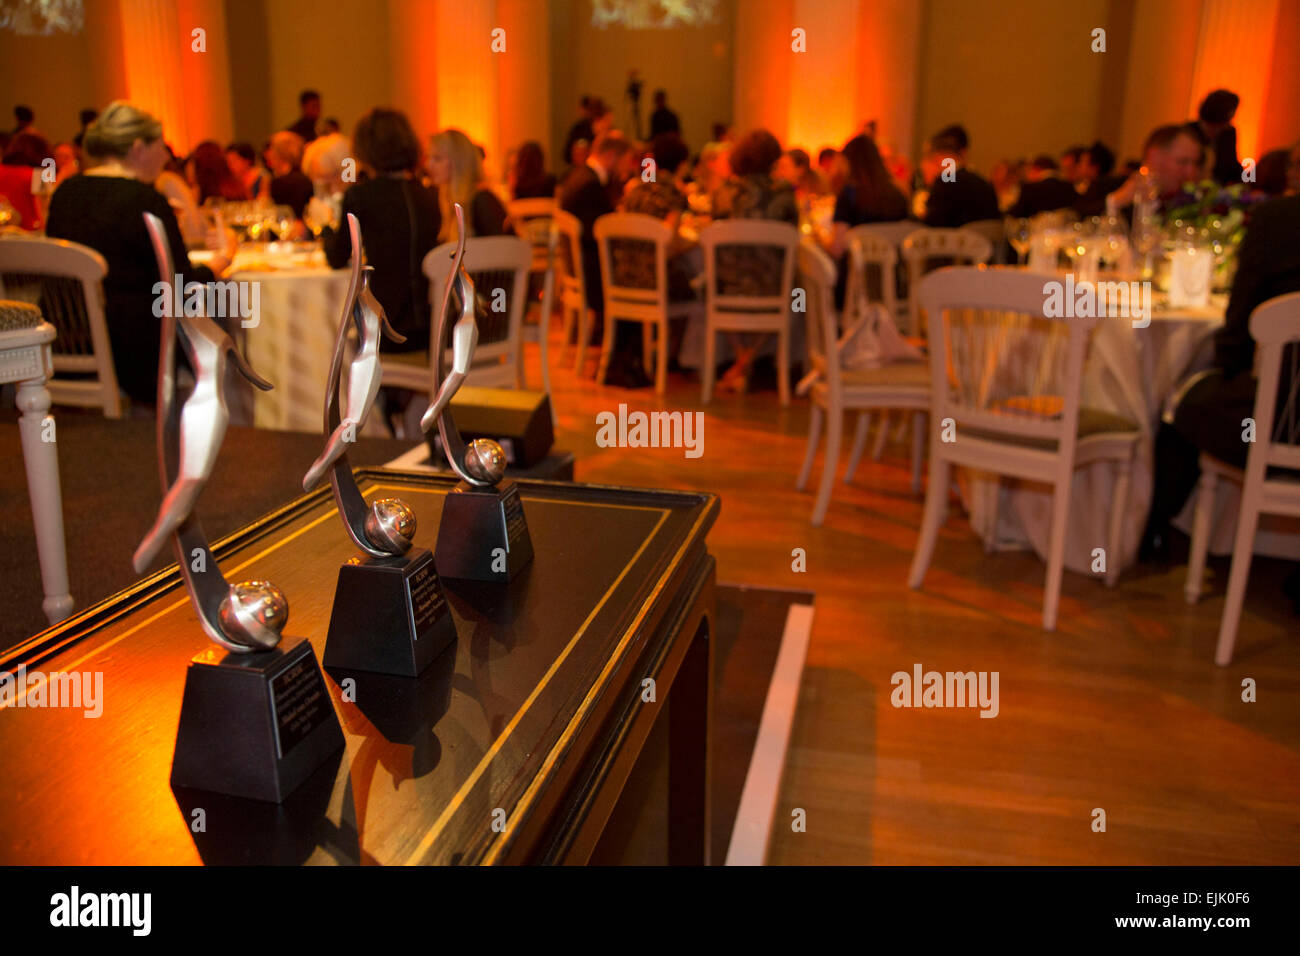 London, UK. Thursday 12th March 2015. International Centre for Research on Women, Champions for Change Awards Dinner event at Banqueting House, Whitehall. The awards. Stock Photo